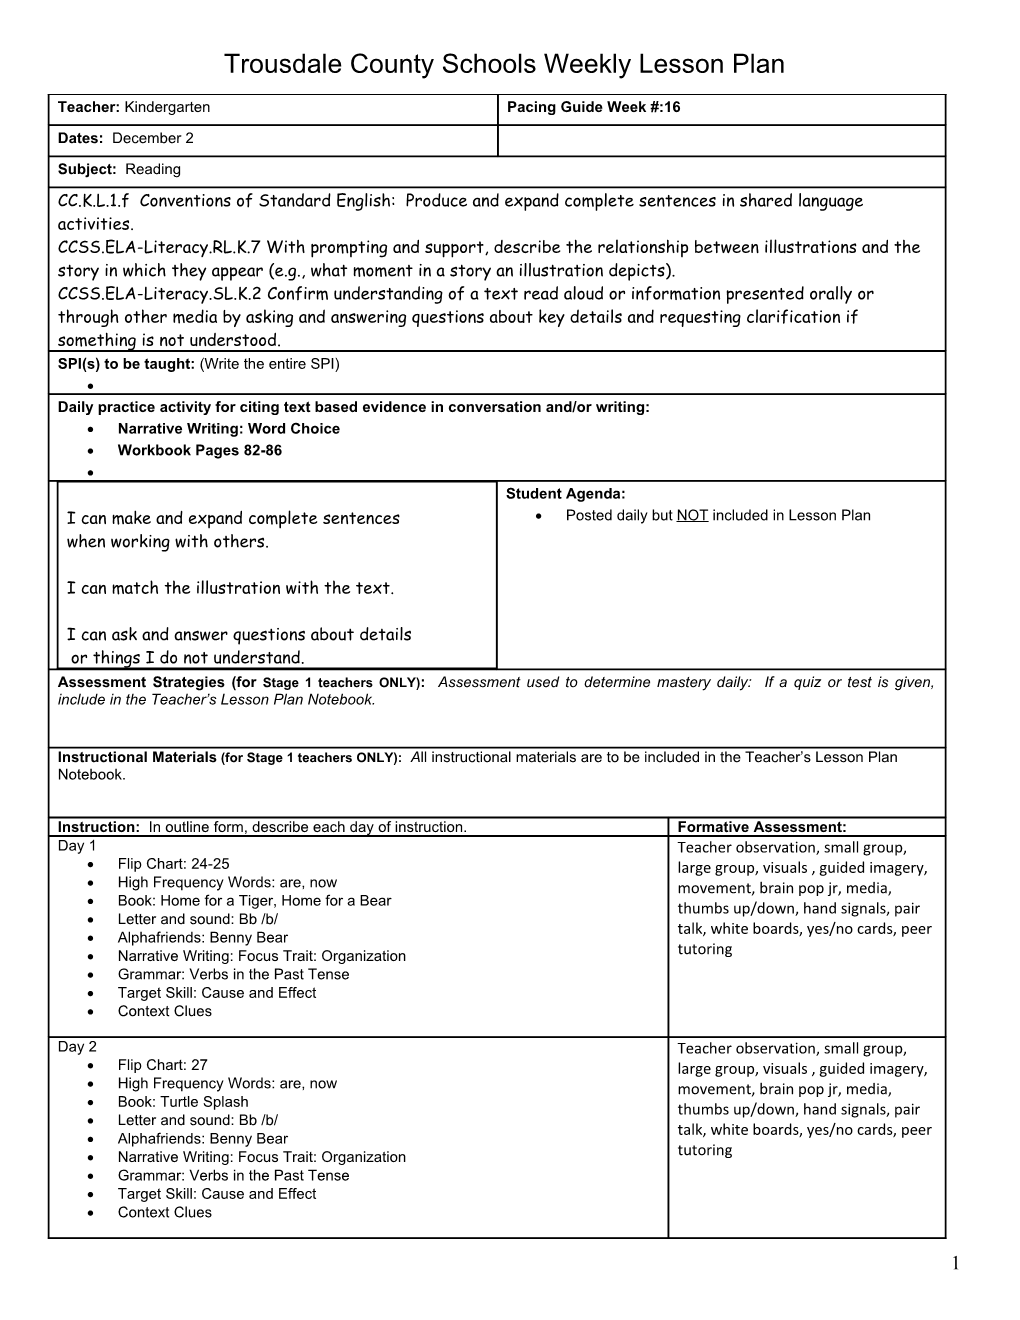 Lesson Plan Template s18